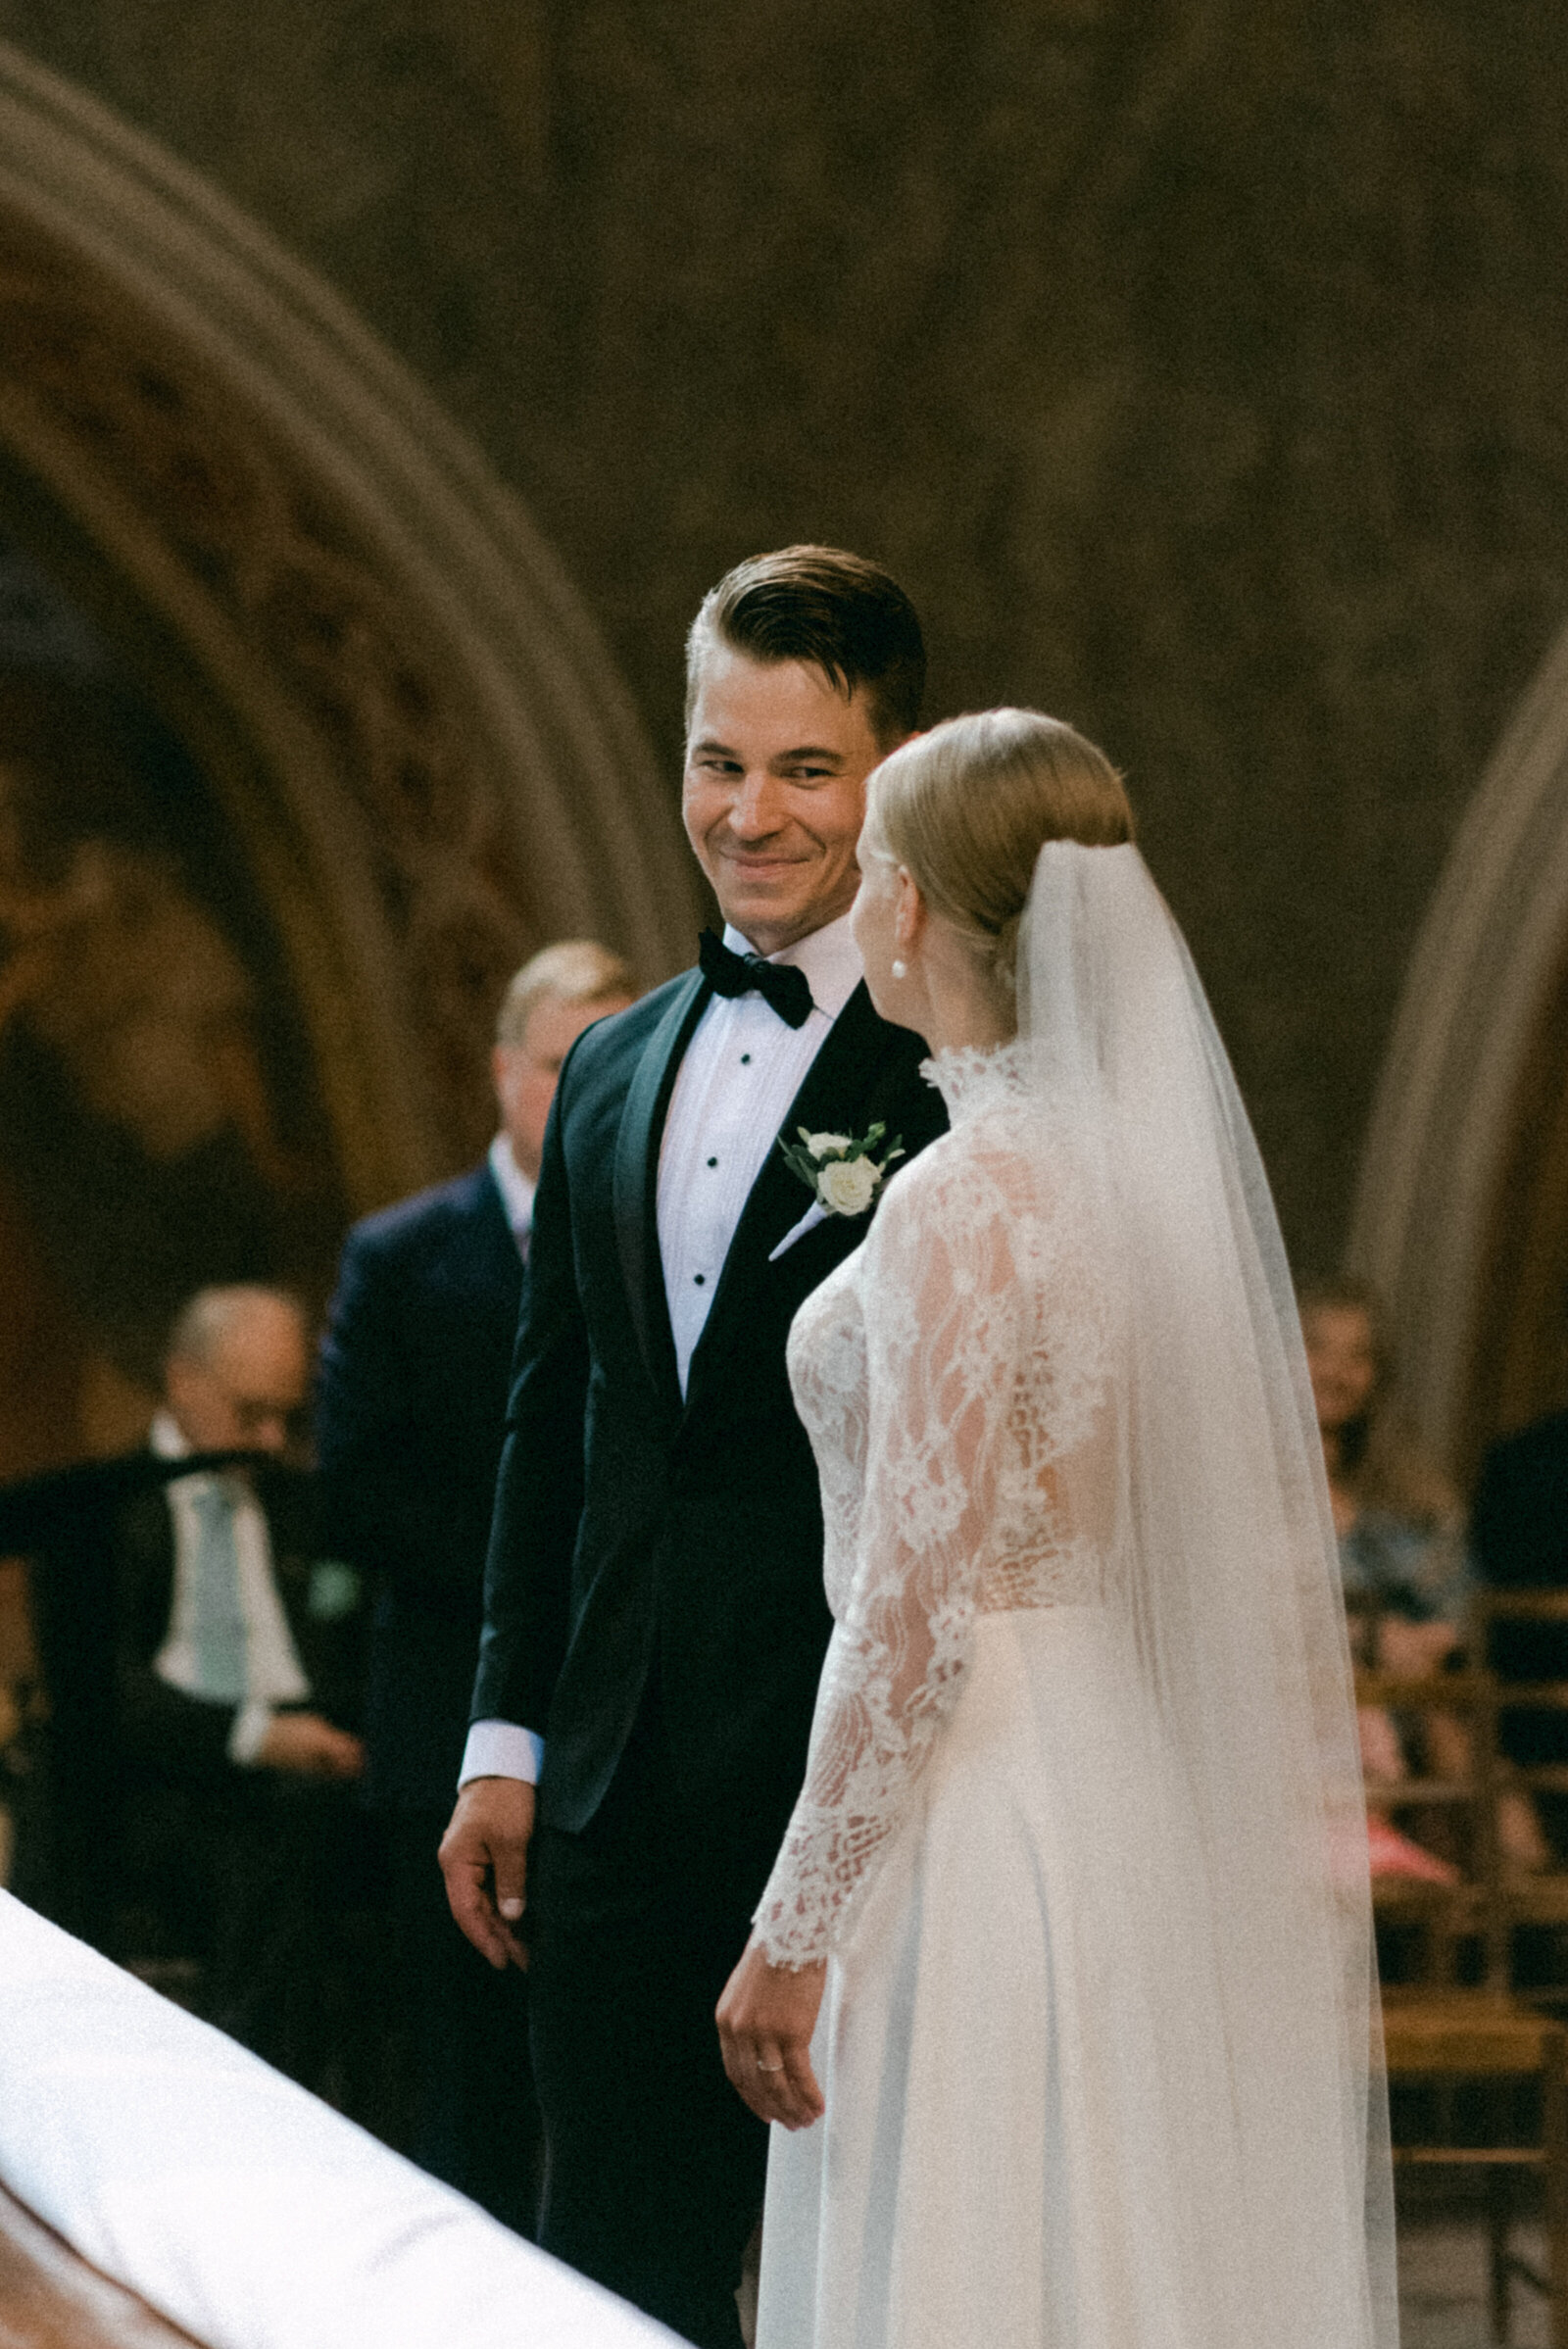 Bride and groom are looking at each other when the bride is saying 'I do' during wedding ceremony in Turku cathedral. Documentary photograph of Scandinavian wedding photographer Hannika Gabrielsson.